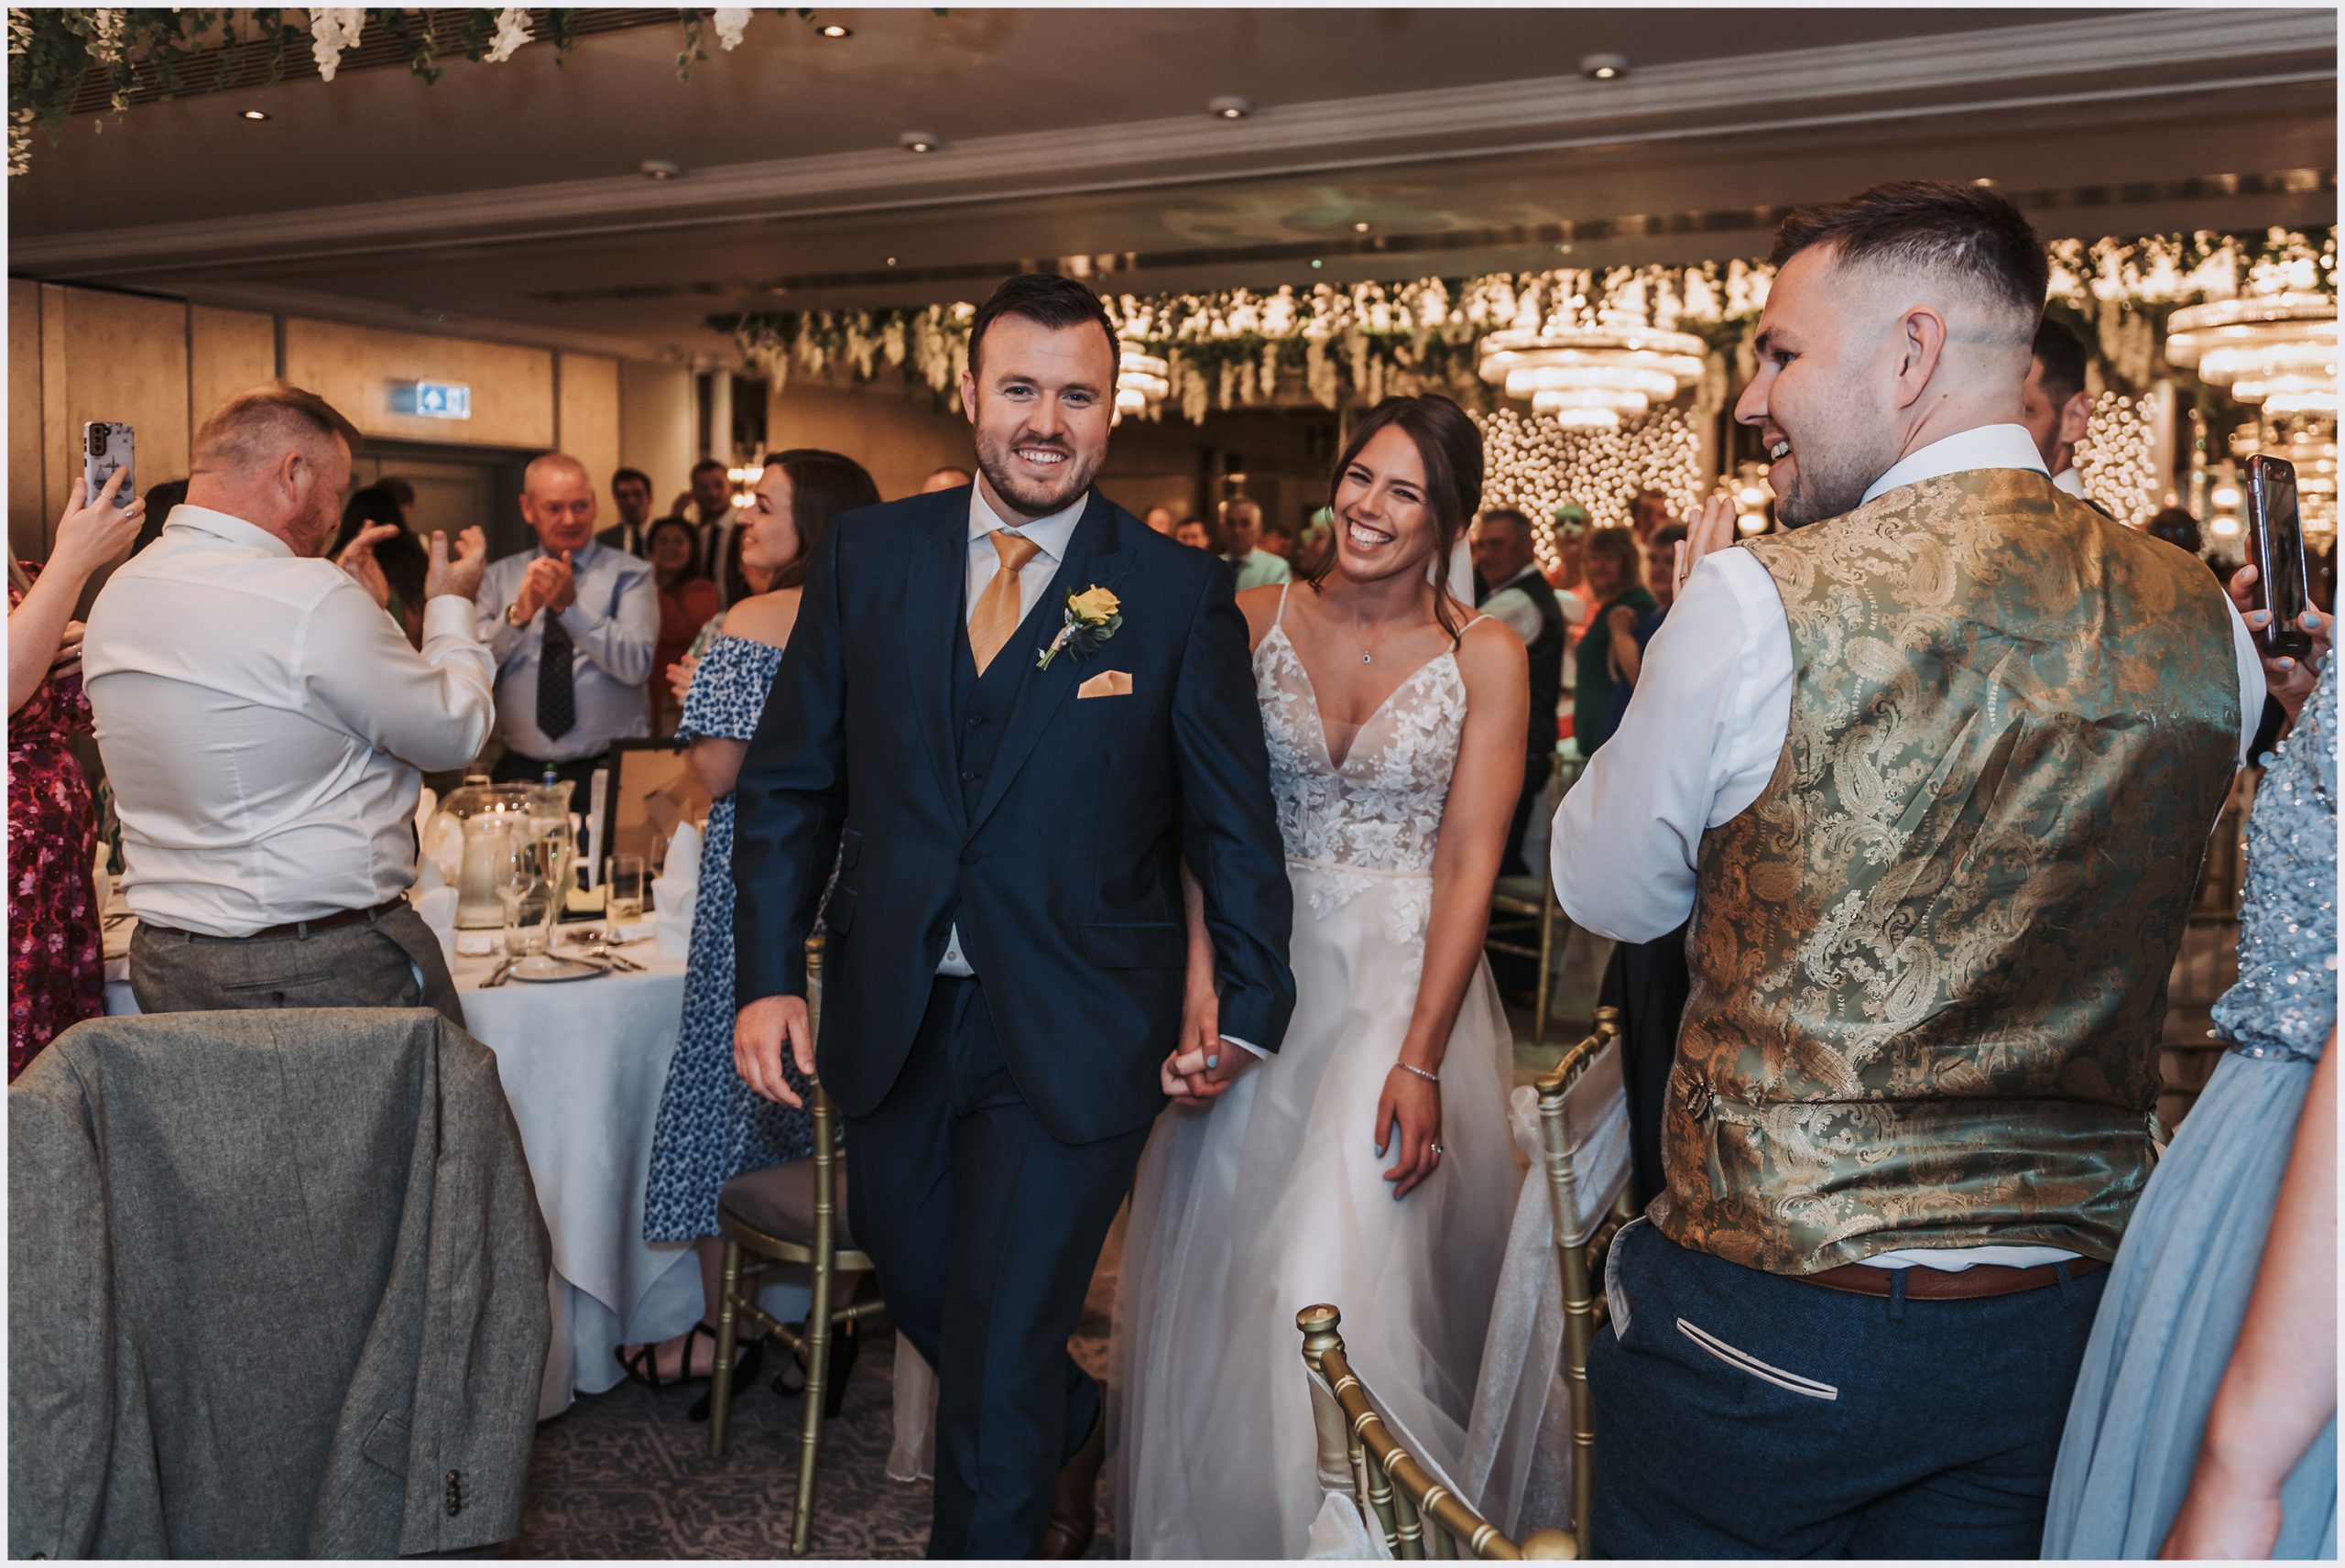 The bride and groom enter the wedding breakfast room while their guests stand and applaud their entrance.  Image captured by Helena Jayne Photography a wedding photographer based in north Wales